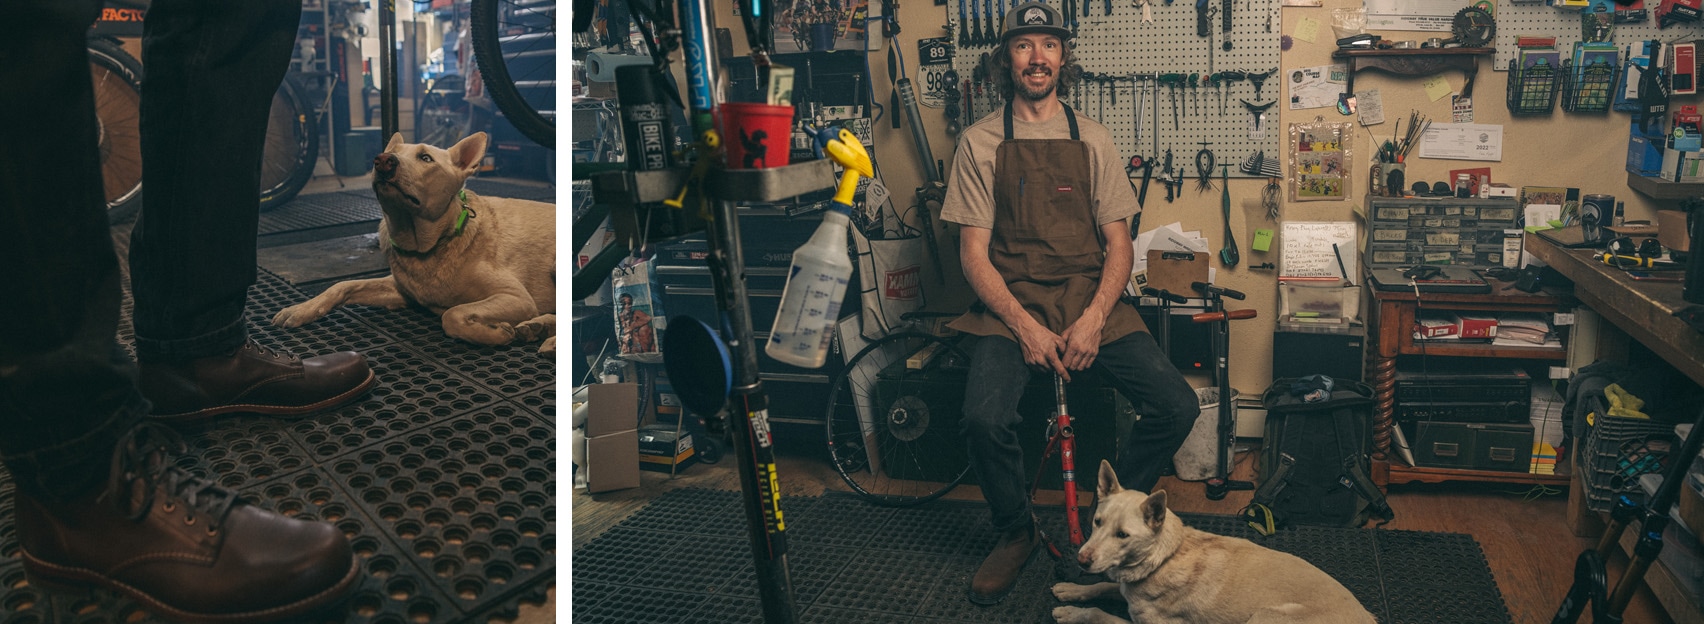 Boots & dog on left and Nathan Miller on the right with another dog in a bike shop.